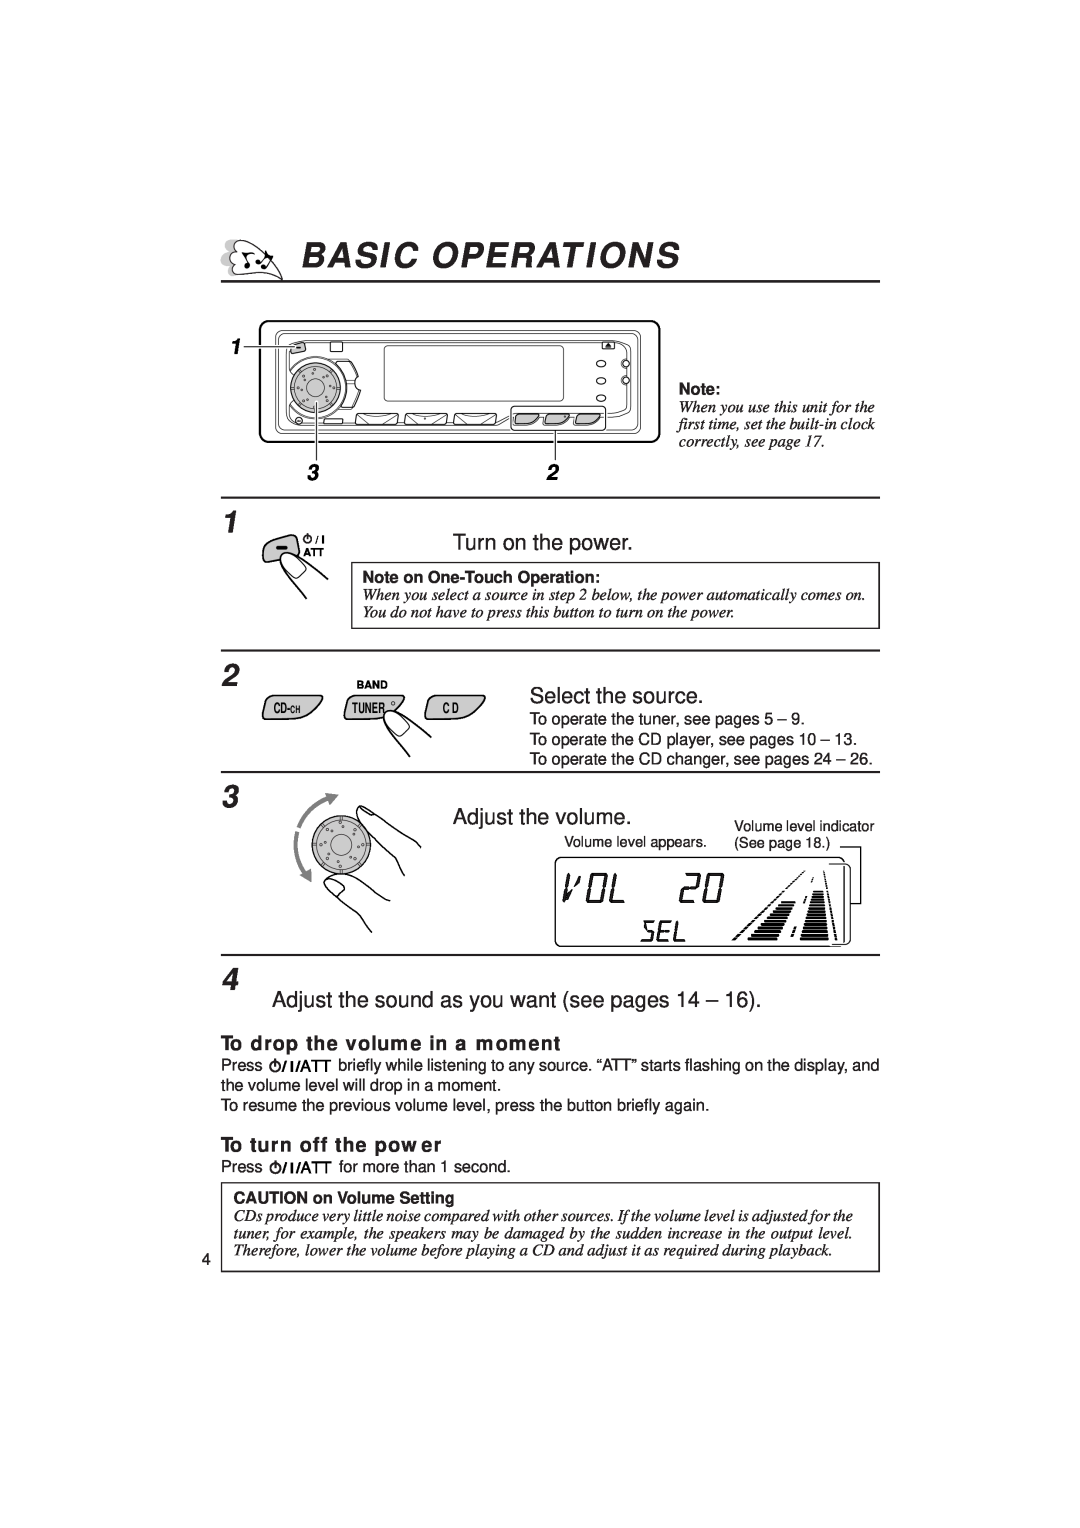 JVC KD-SX939/SX930 manual Basic Operations, Select the source, To drop the volume in a moment, To turn off the power 